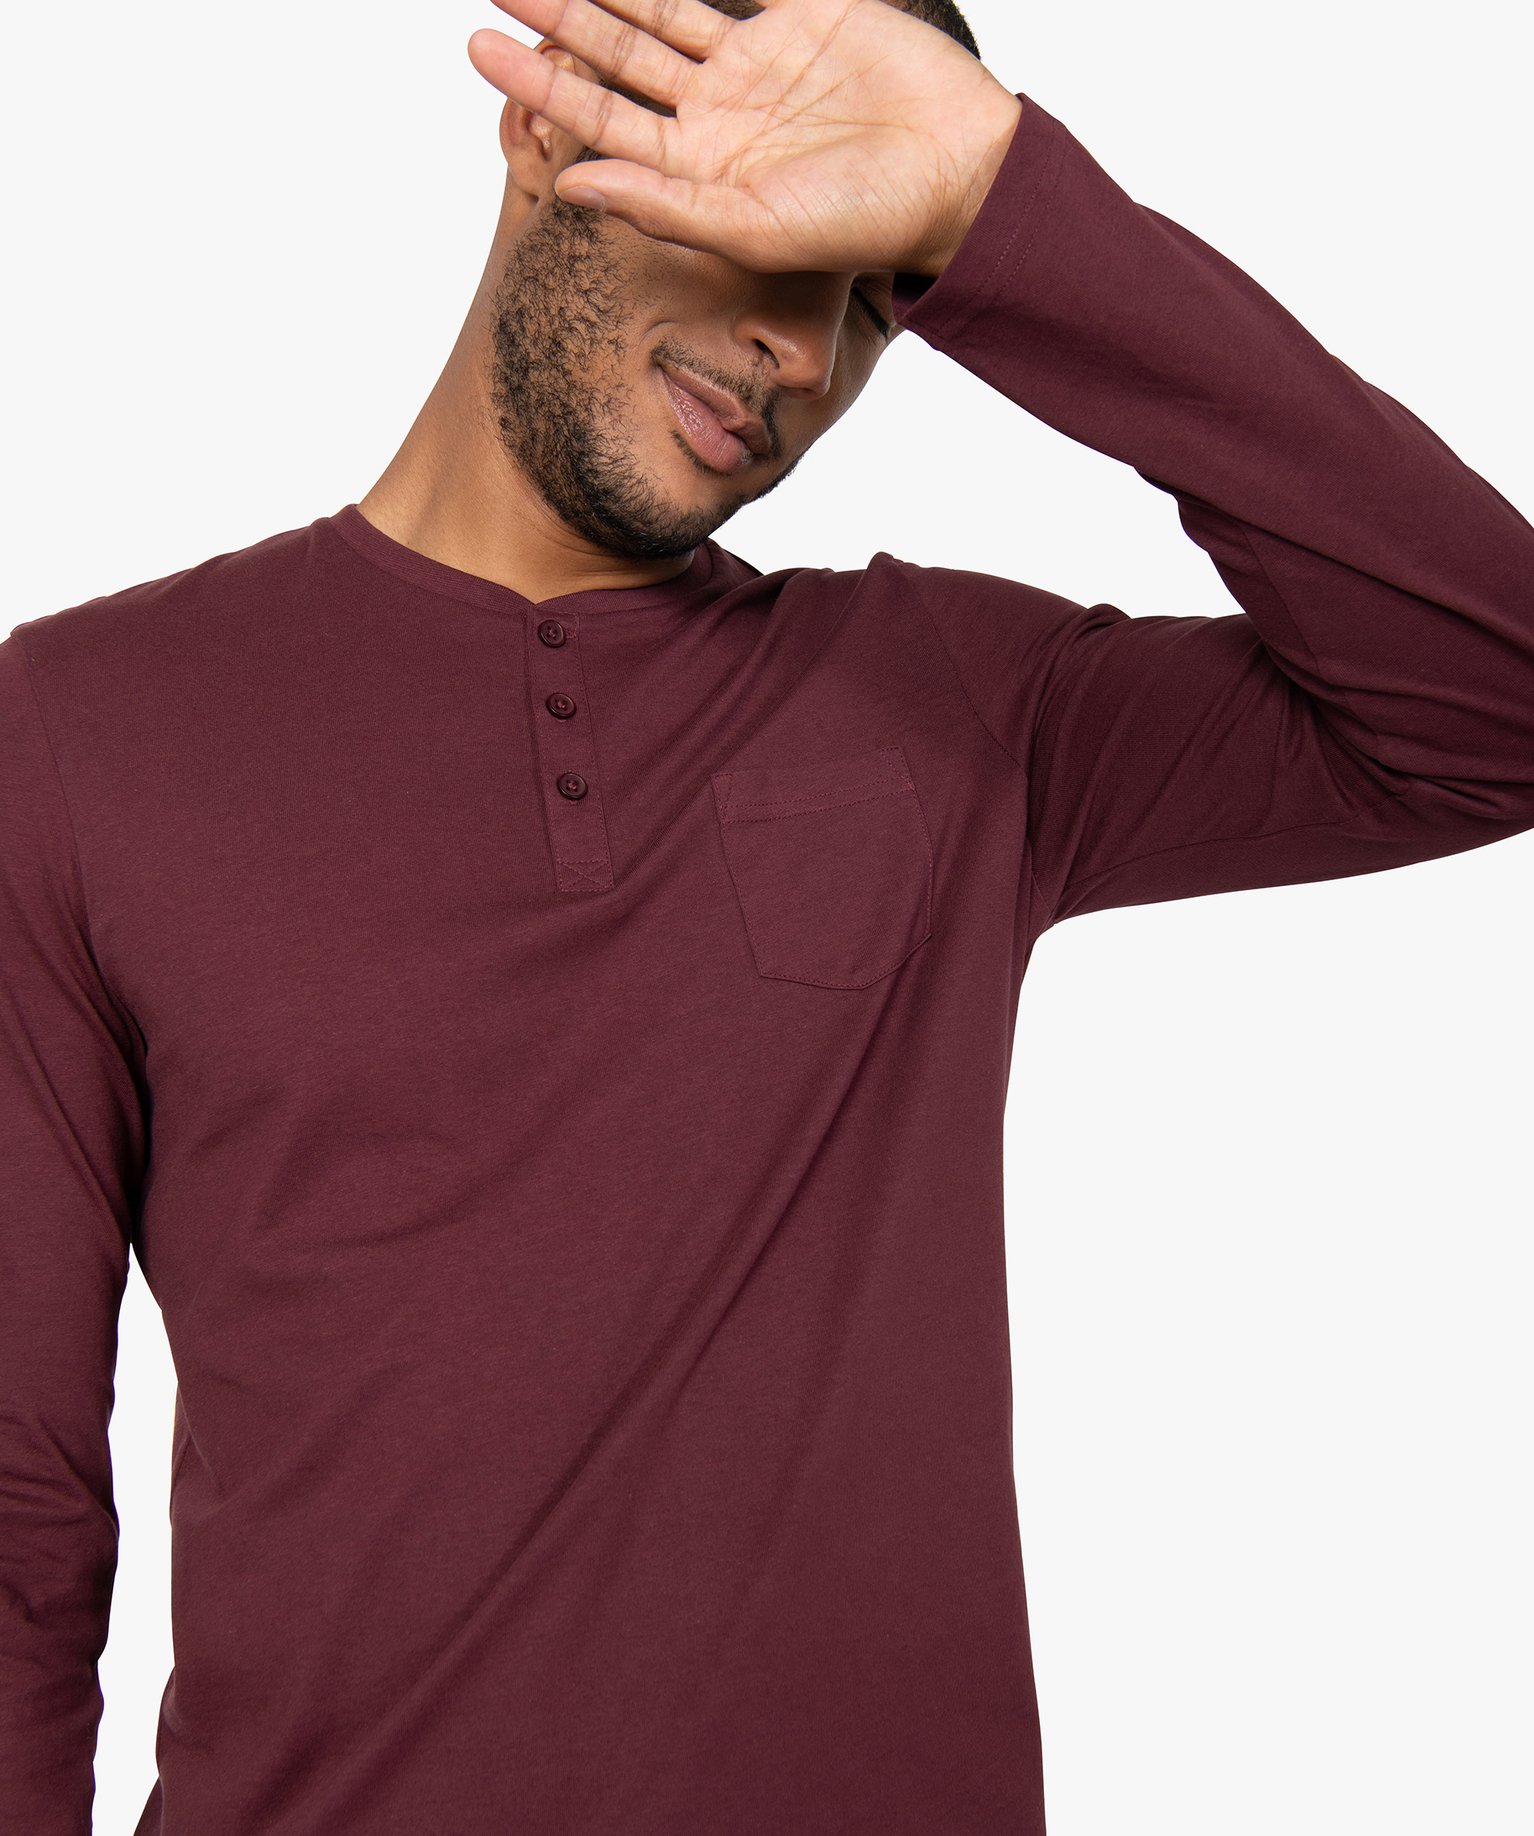 tee-shirt homme a manches longues et col tunisien rouge tee-shirts